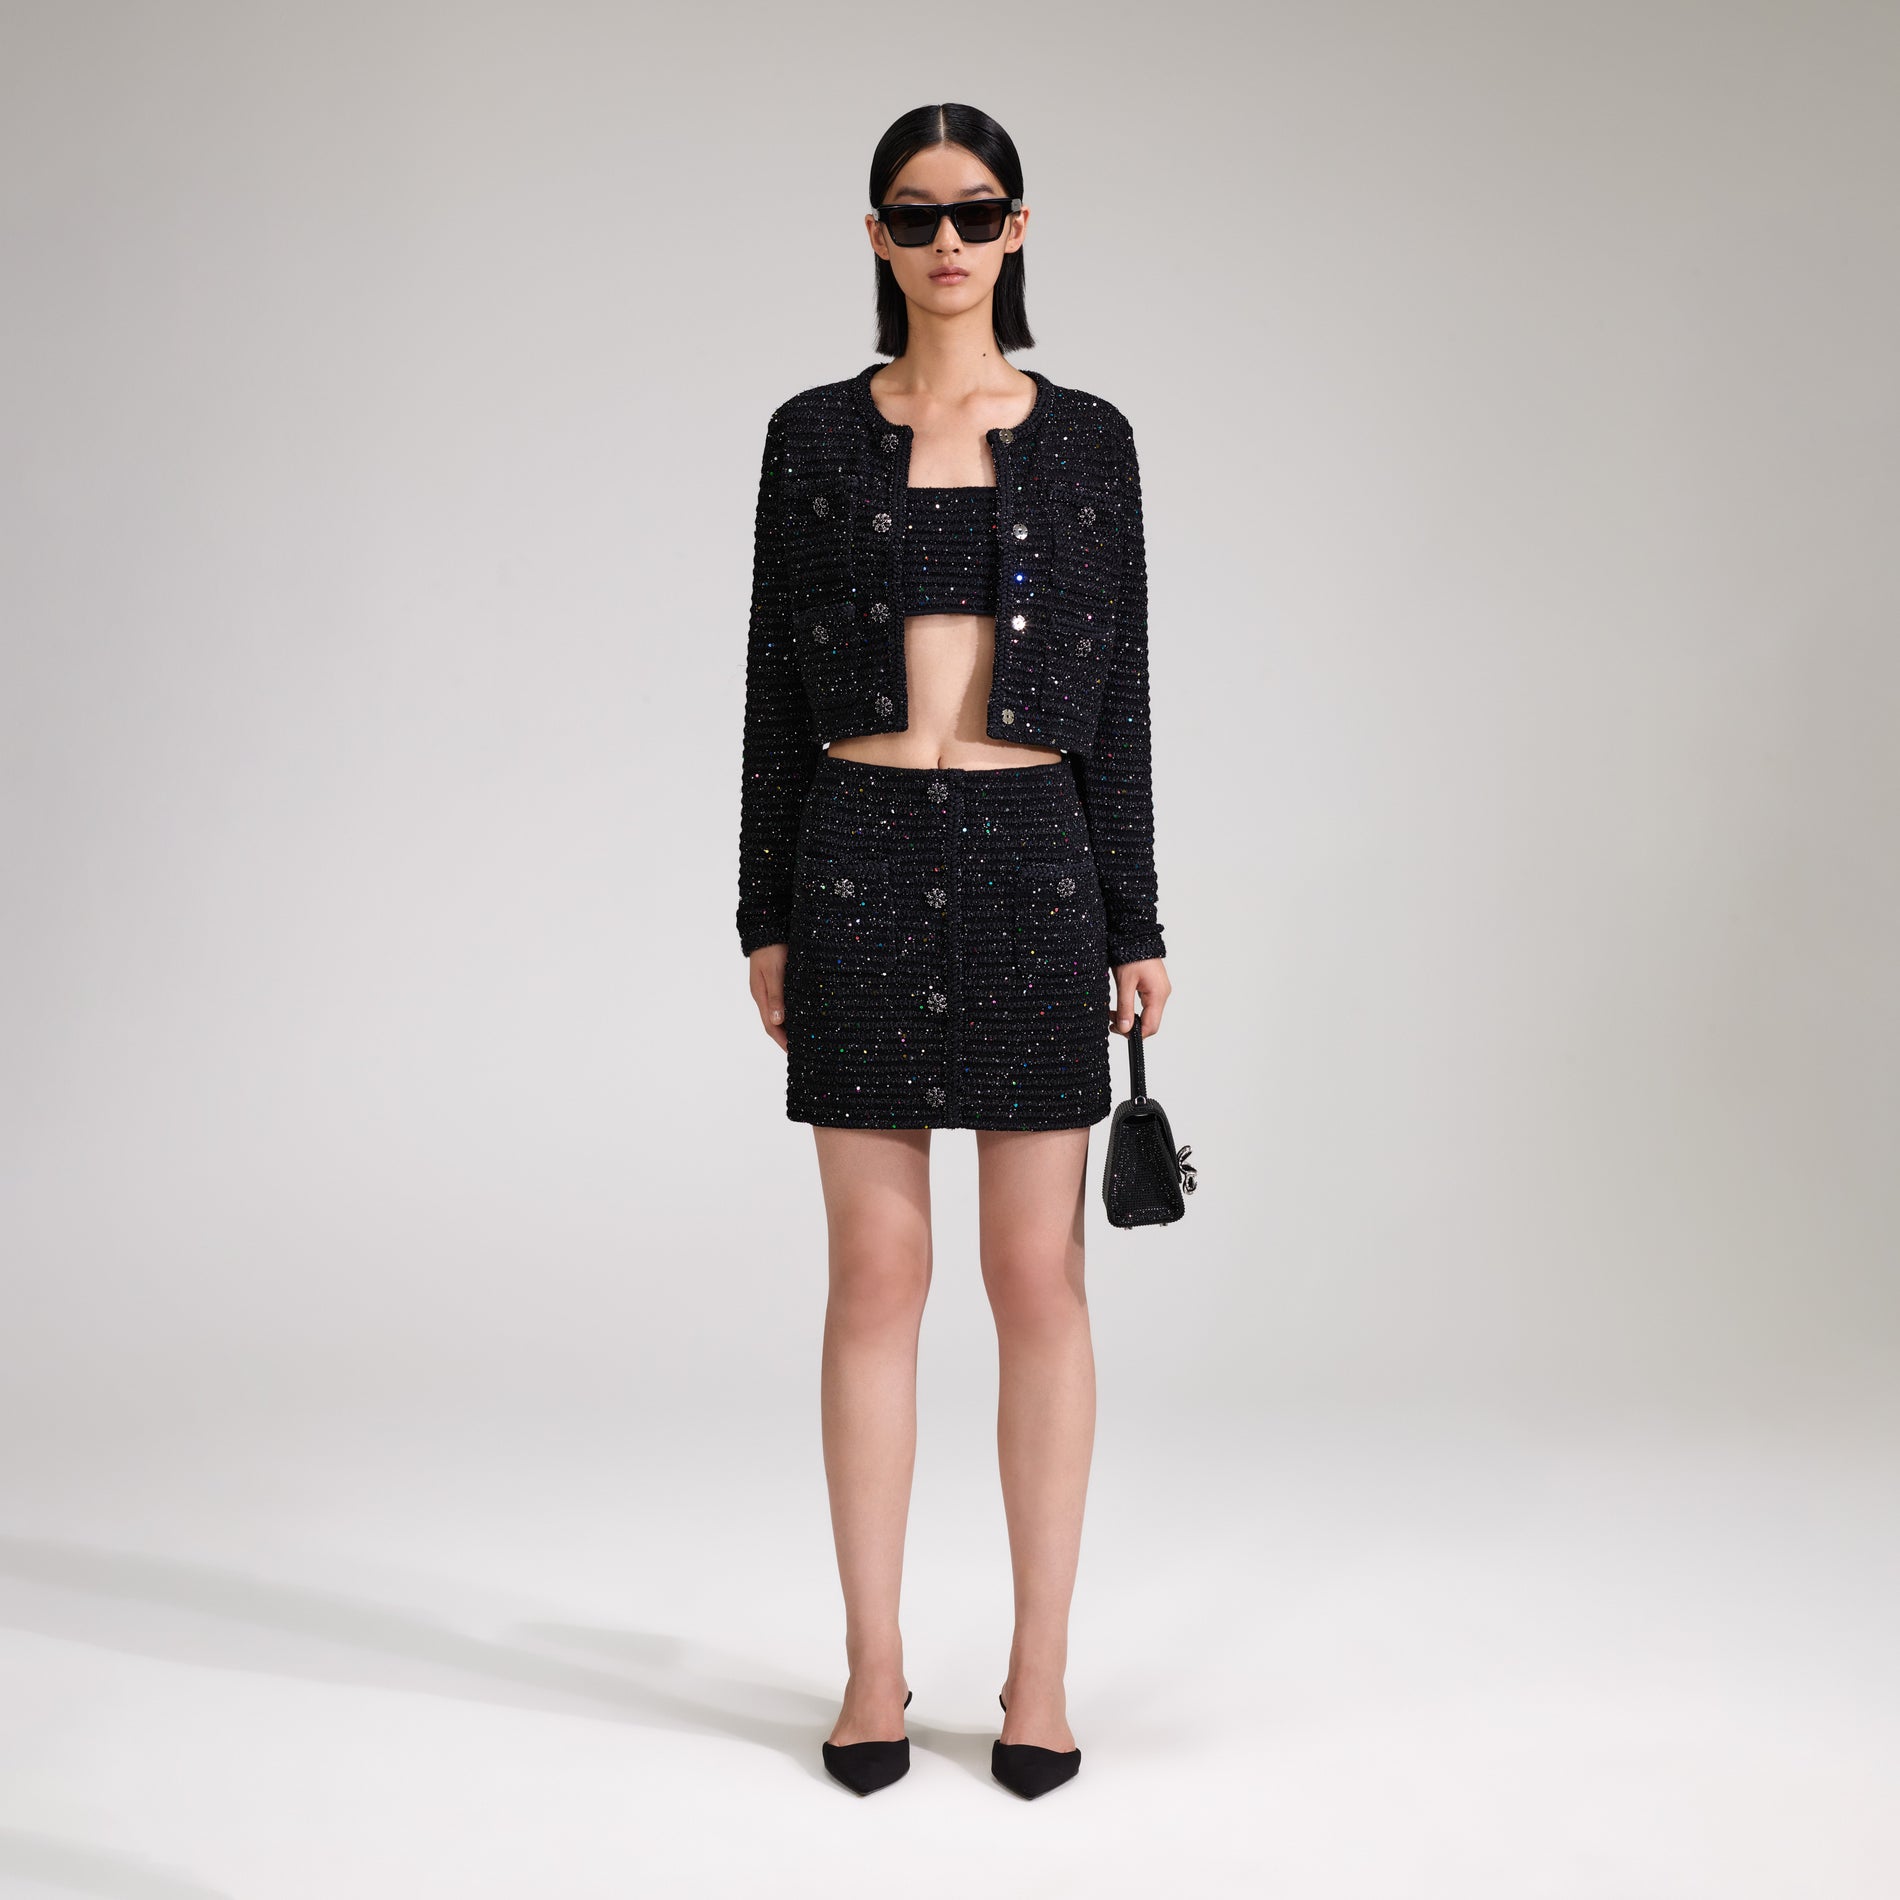 A woman wearing the Black Sequin Knit Skirt